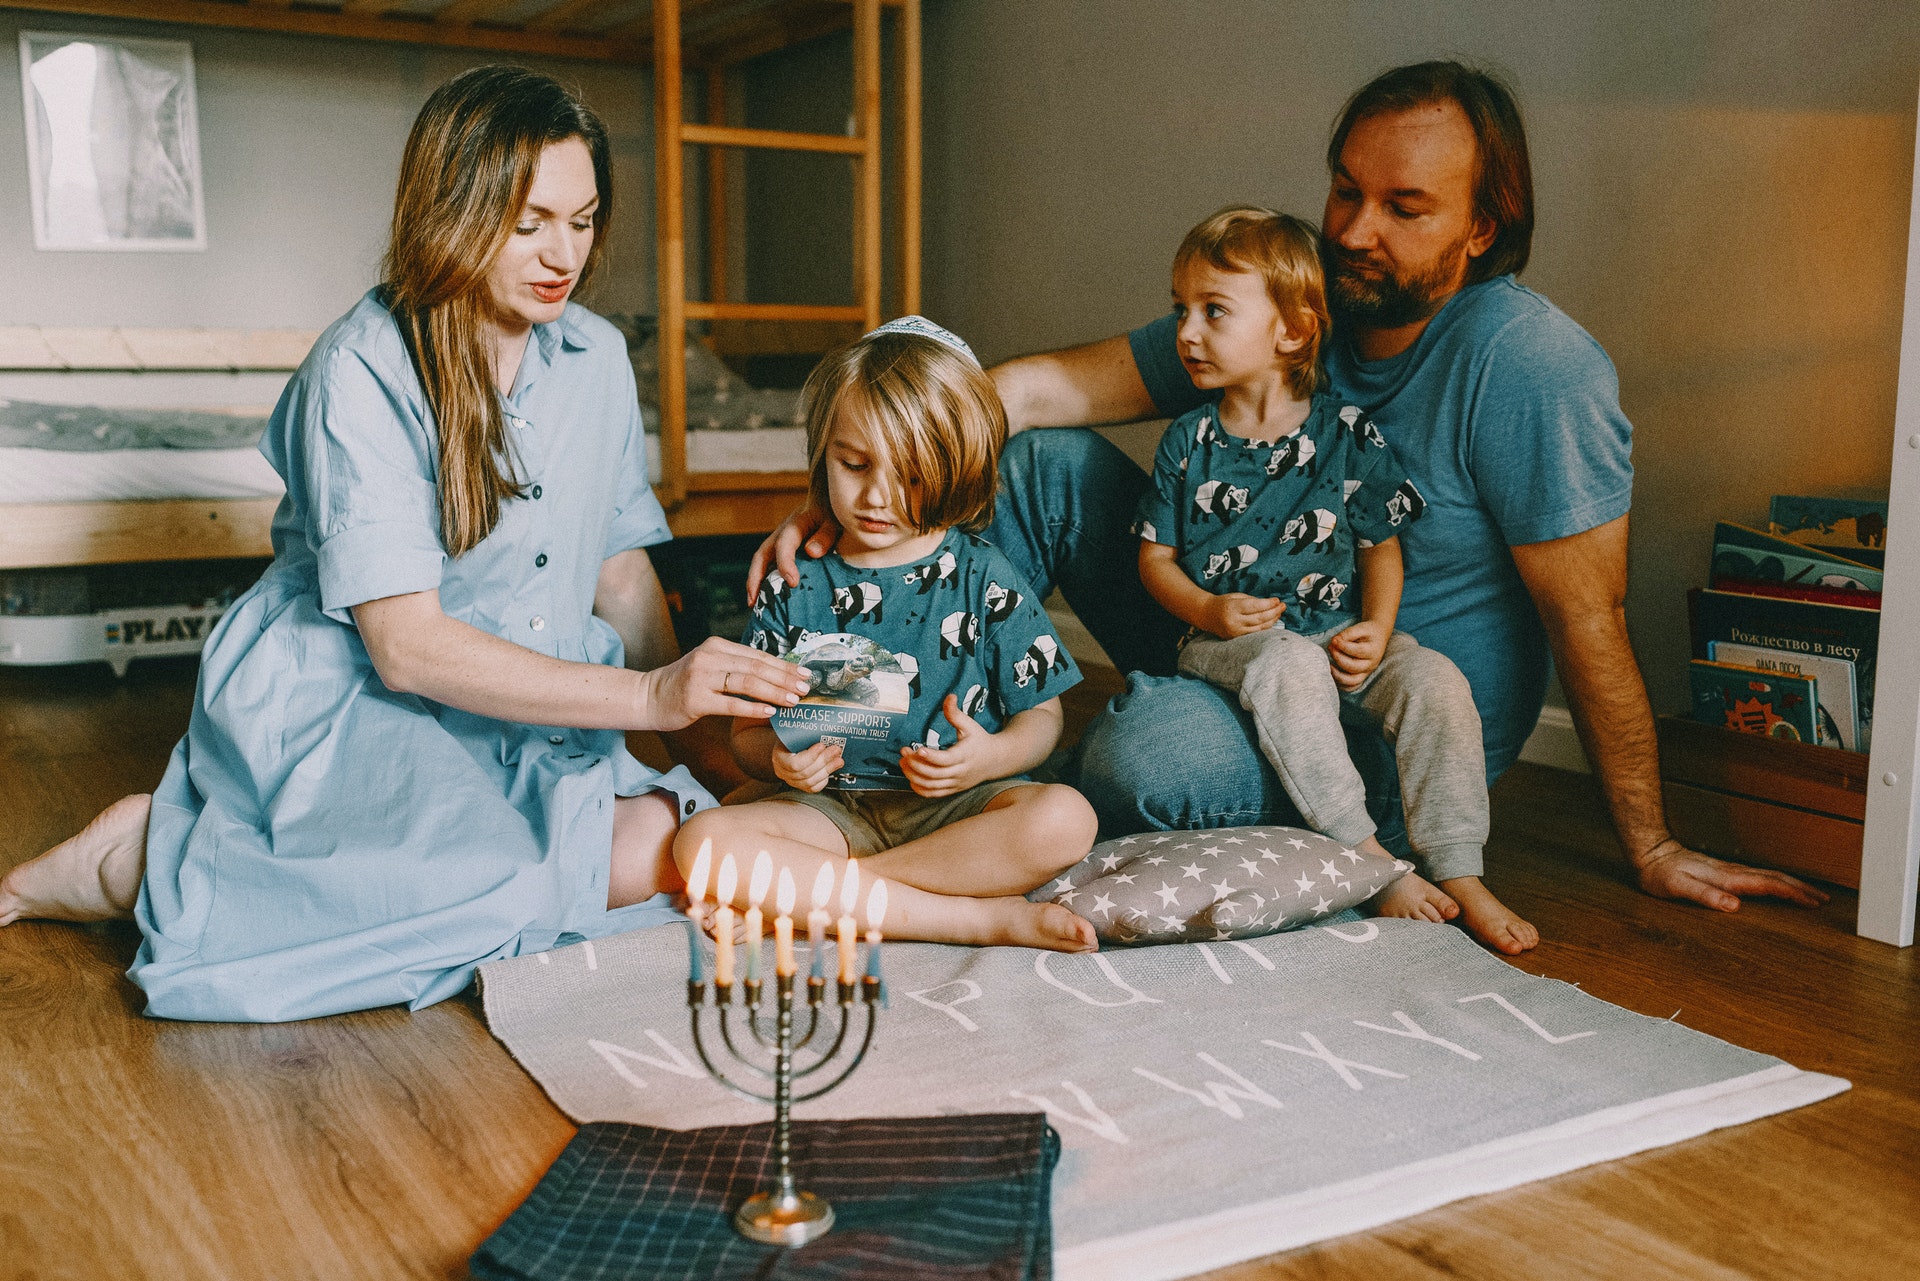 Hanukkah Activities, Games, and Crafts for Kids